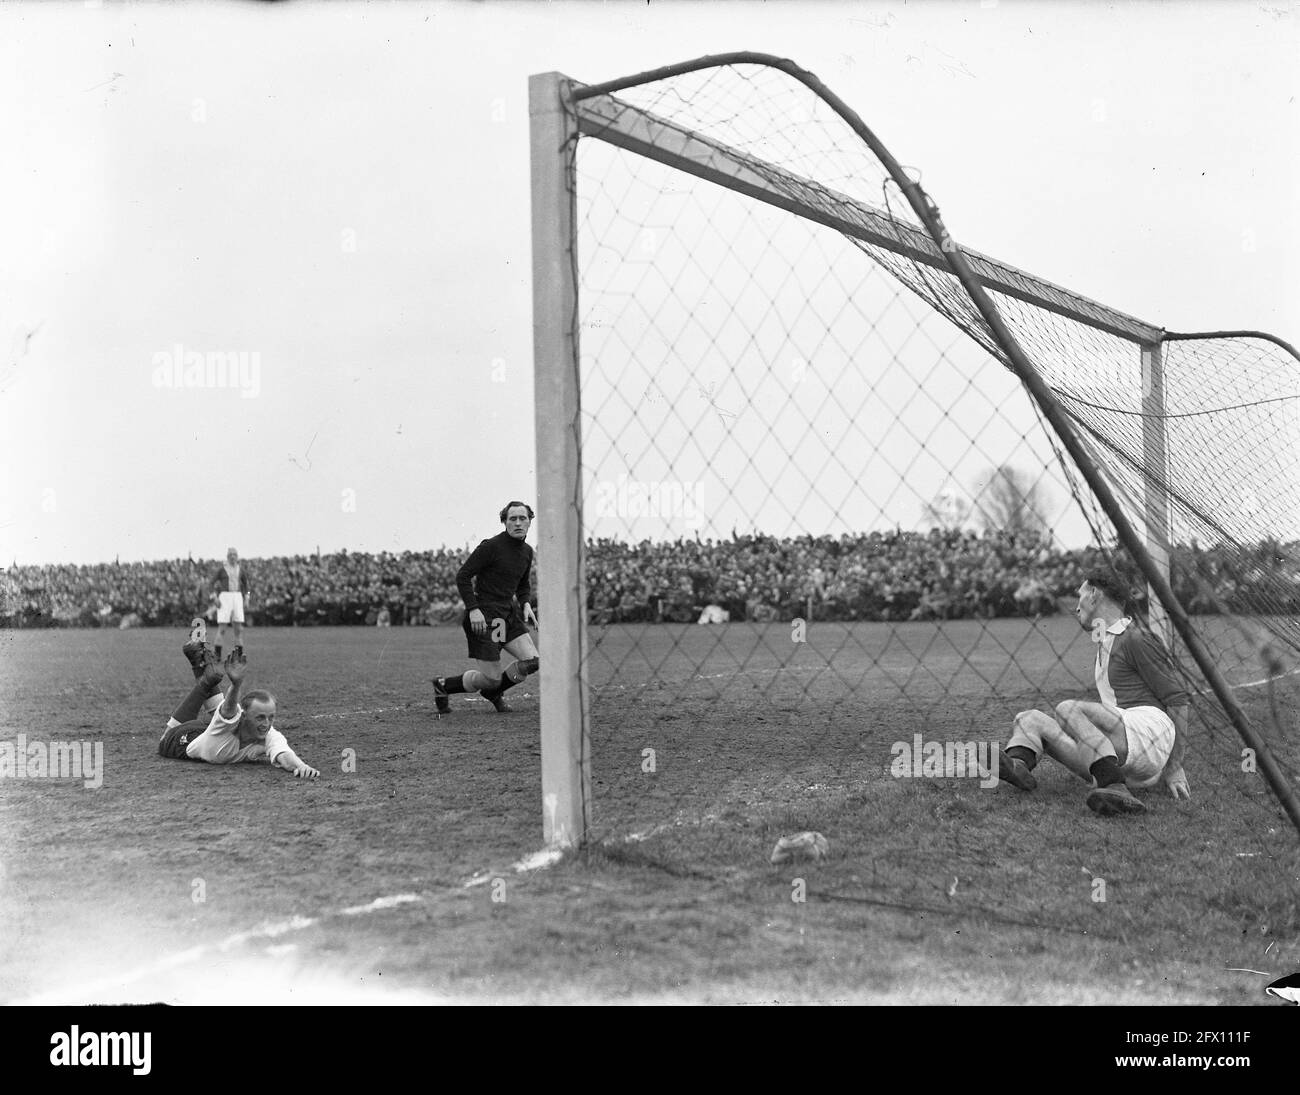 Zwolsche Boys - Go Ahead 2-3. 2nd goal by Zwolsche Boys, March 20, 1948, sports, soccer, The Netherlands, 20th century press agency photo, news to remember, documentary, historic photography 1945-1990, visual stories, human history of the Twentieth Century, capturing moments in time Stock Photo